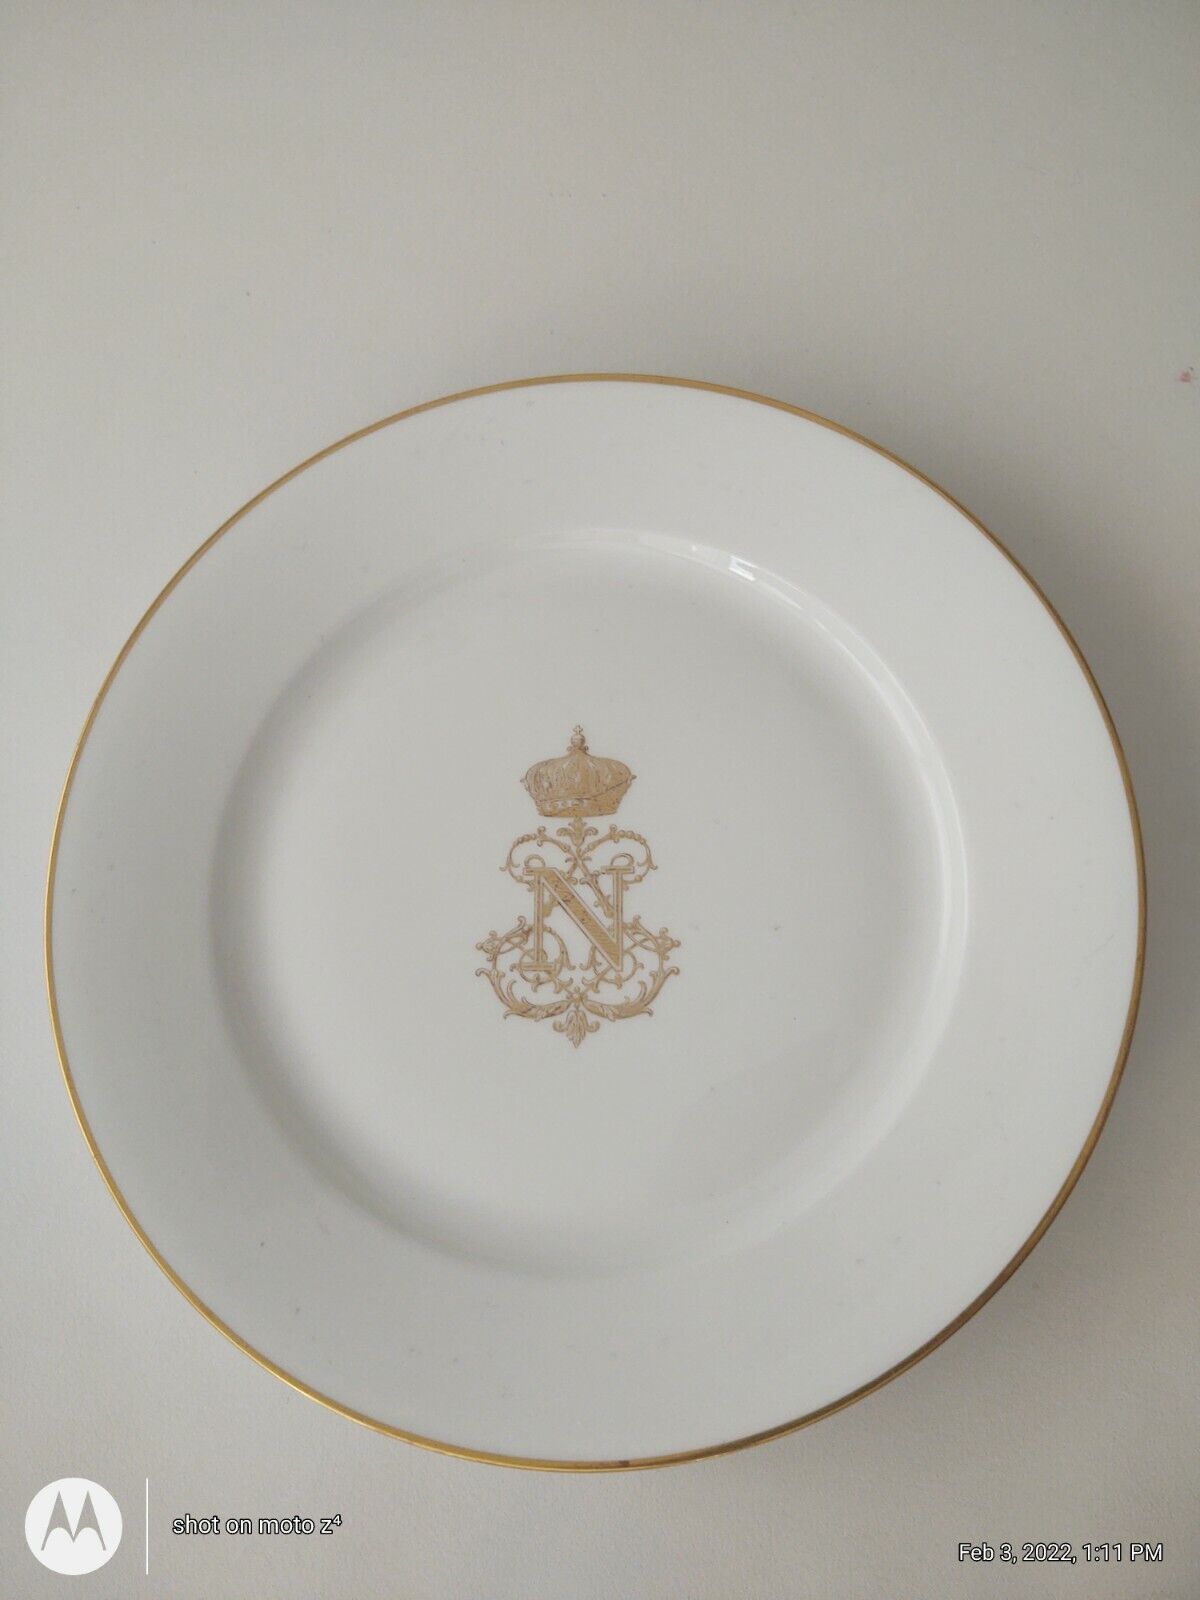 EMPEROR NAPOLEON III  Sevres  Porcelain  Plate FROM HIS SERVICE